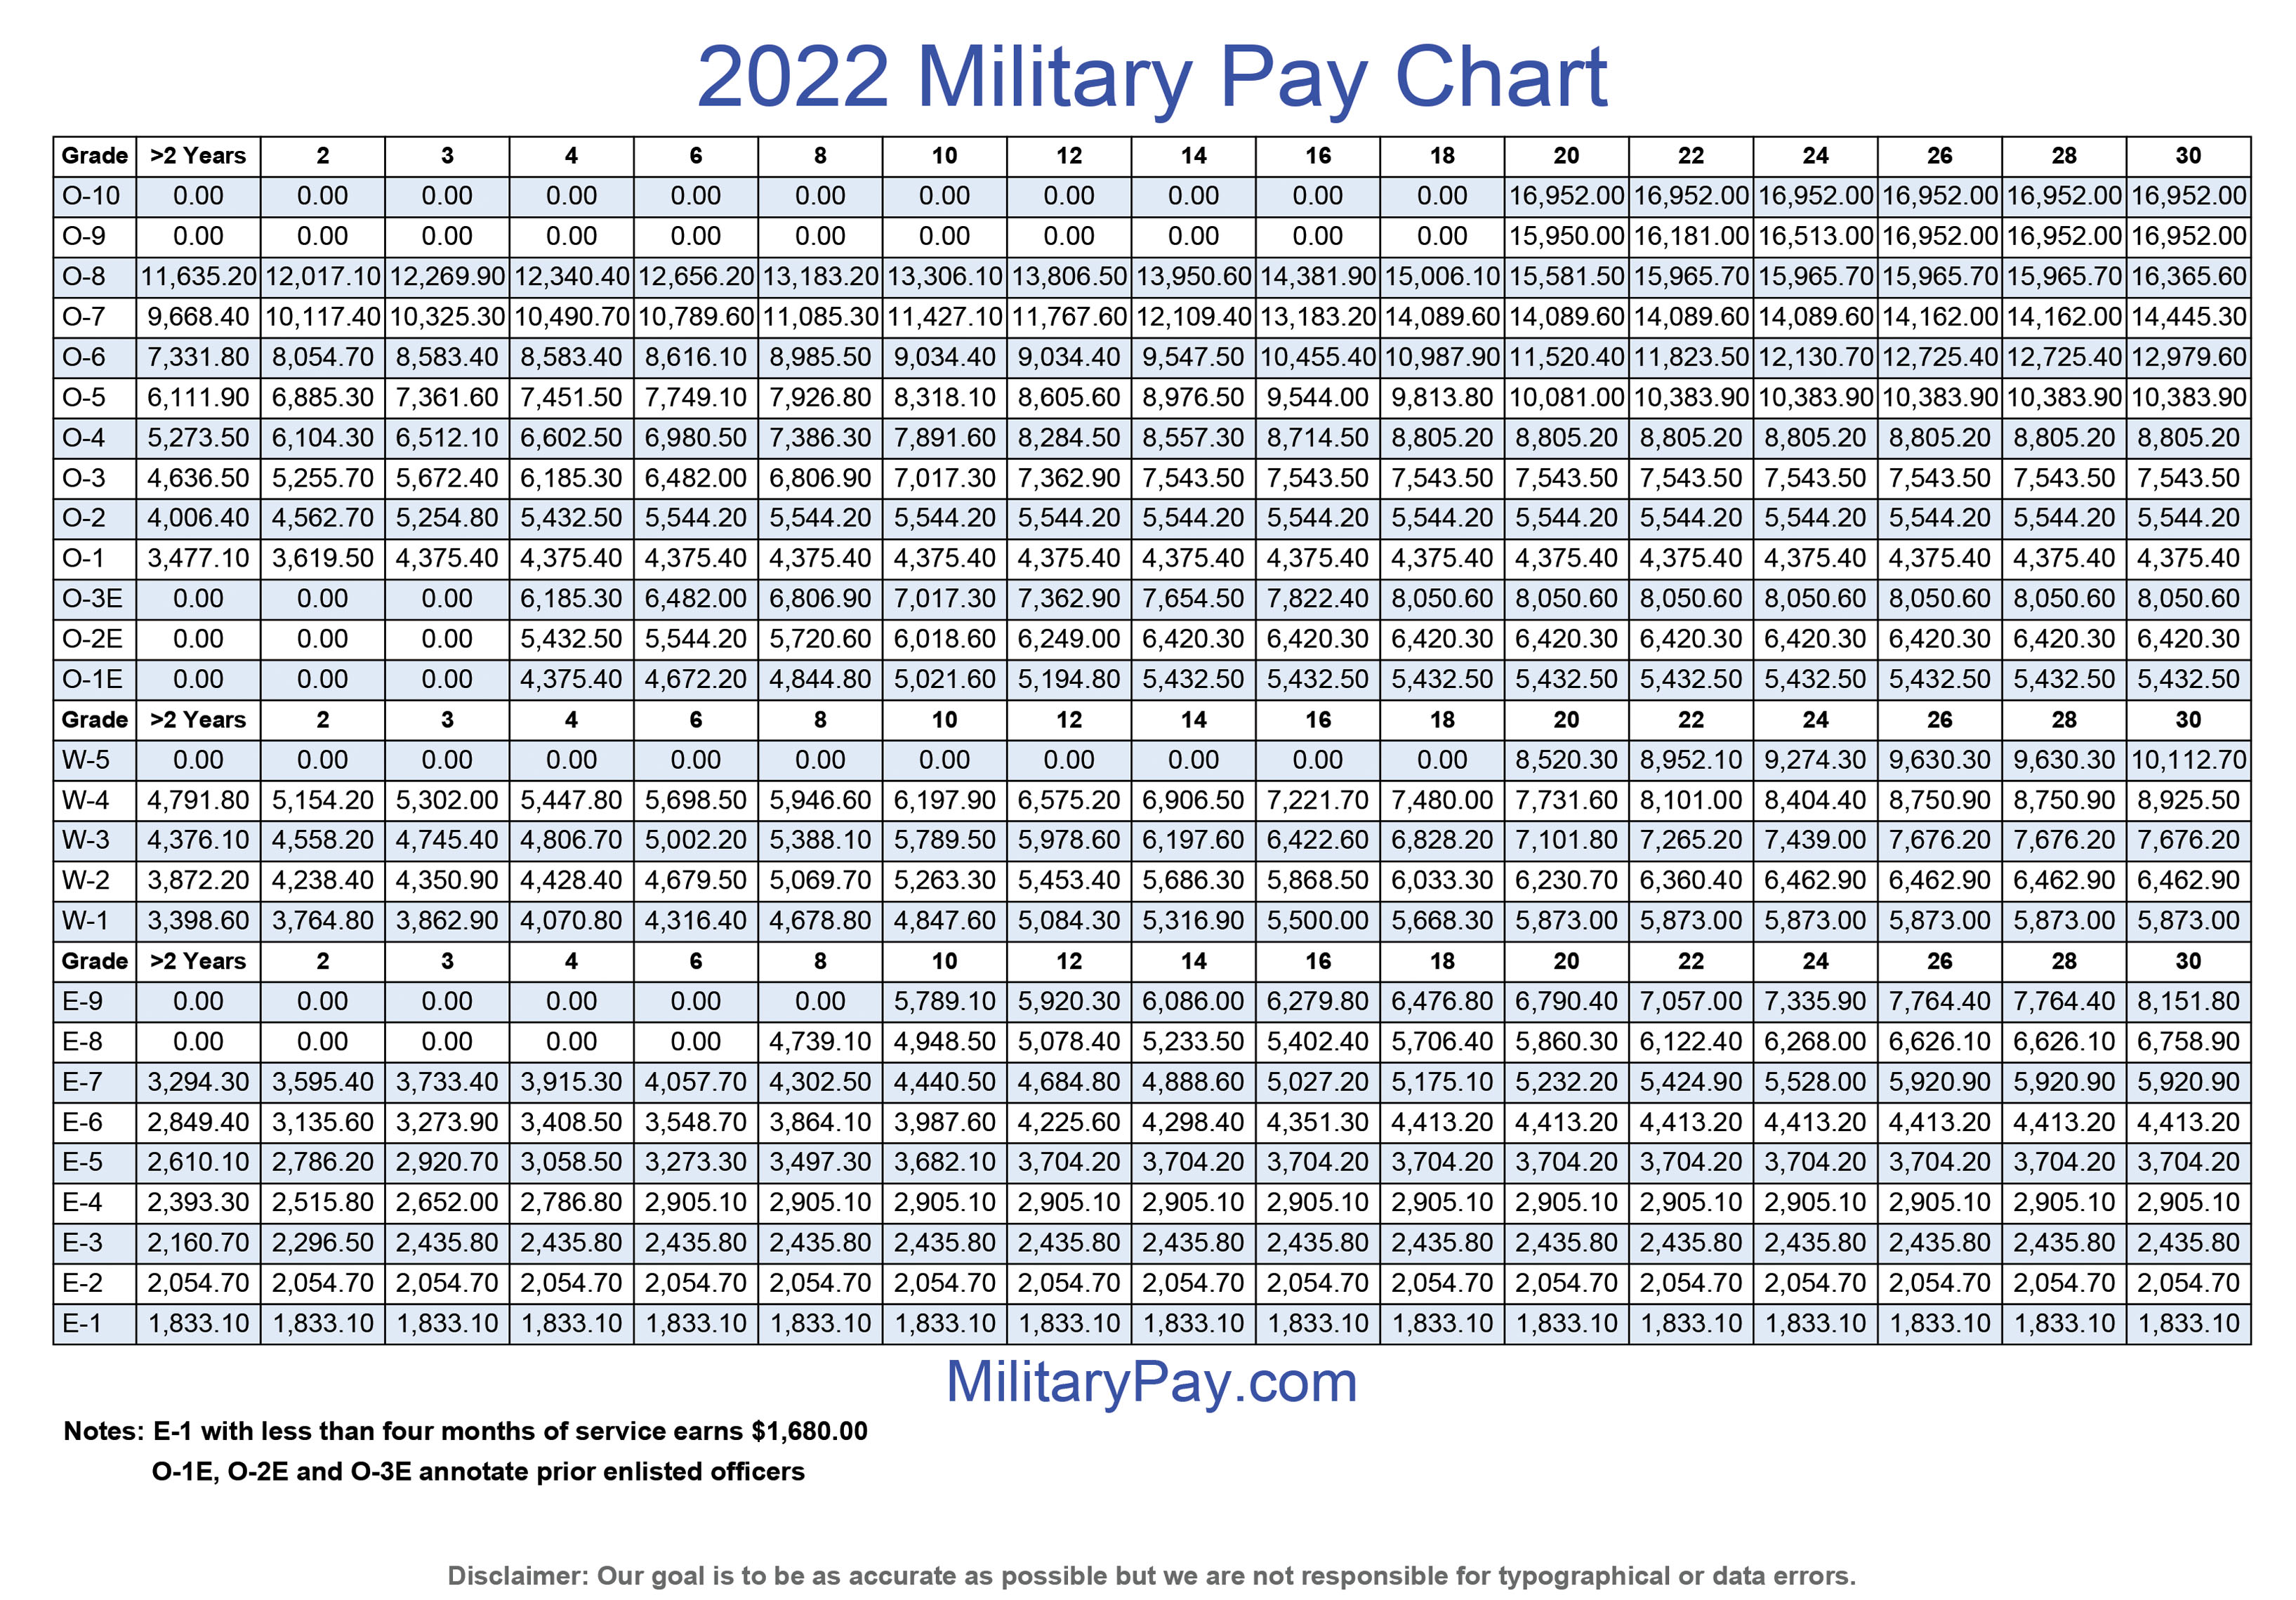 Military Pay Charts 1949 to 2022 plus estimated to 2050